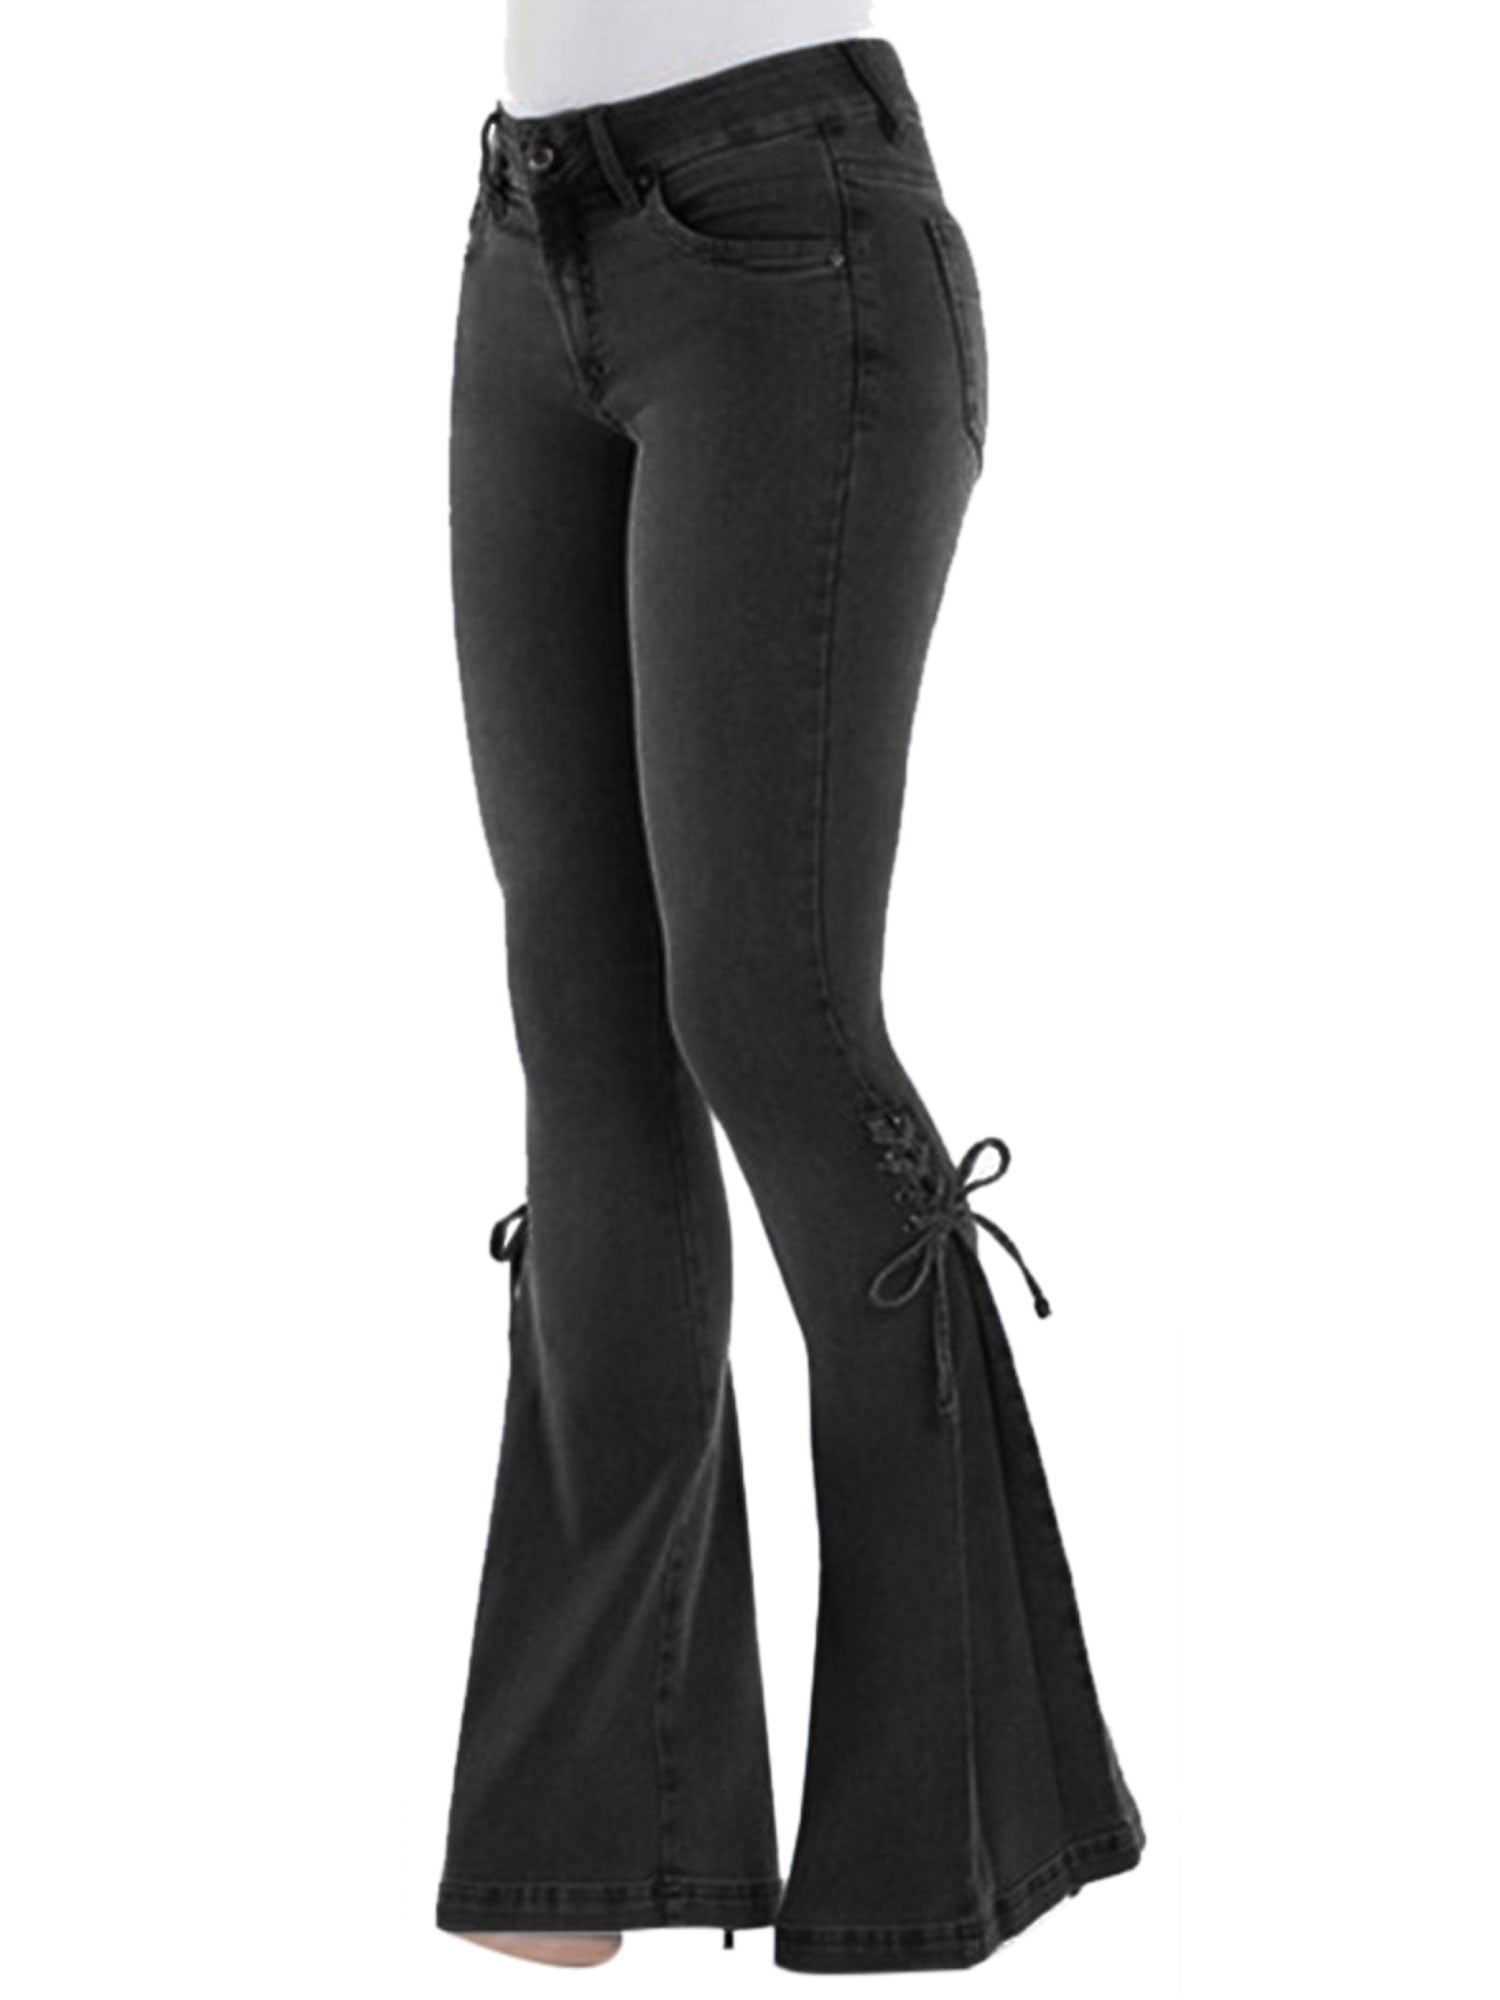 Sexy Dance Womens Vintage High Waisted Flared Bell Bottom Jeans Trendy Stretch Denim Pants